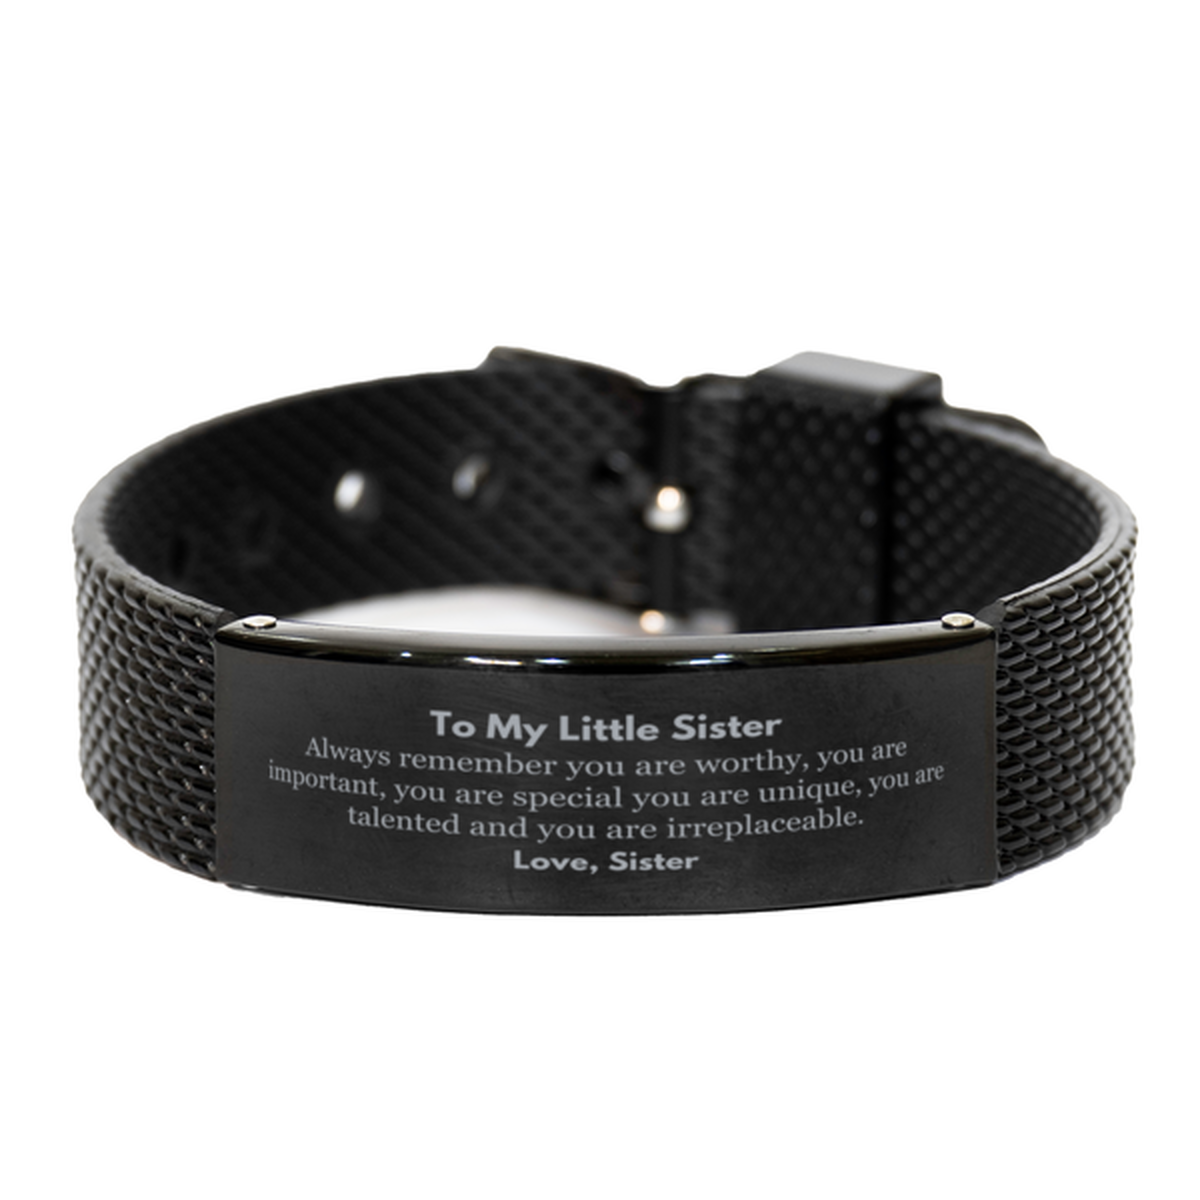 Little Sister Birthday Gifts from Sister, Inspirational Black Shark Mesh Bracelet for Little Sister Christmas Graduation Gifts for Little Sister Always remember you are worthy, you are important. Love, Sister